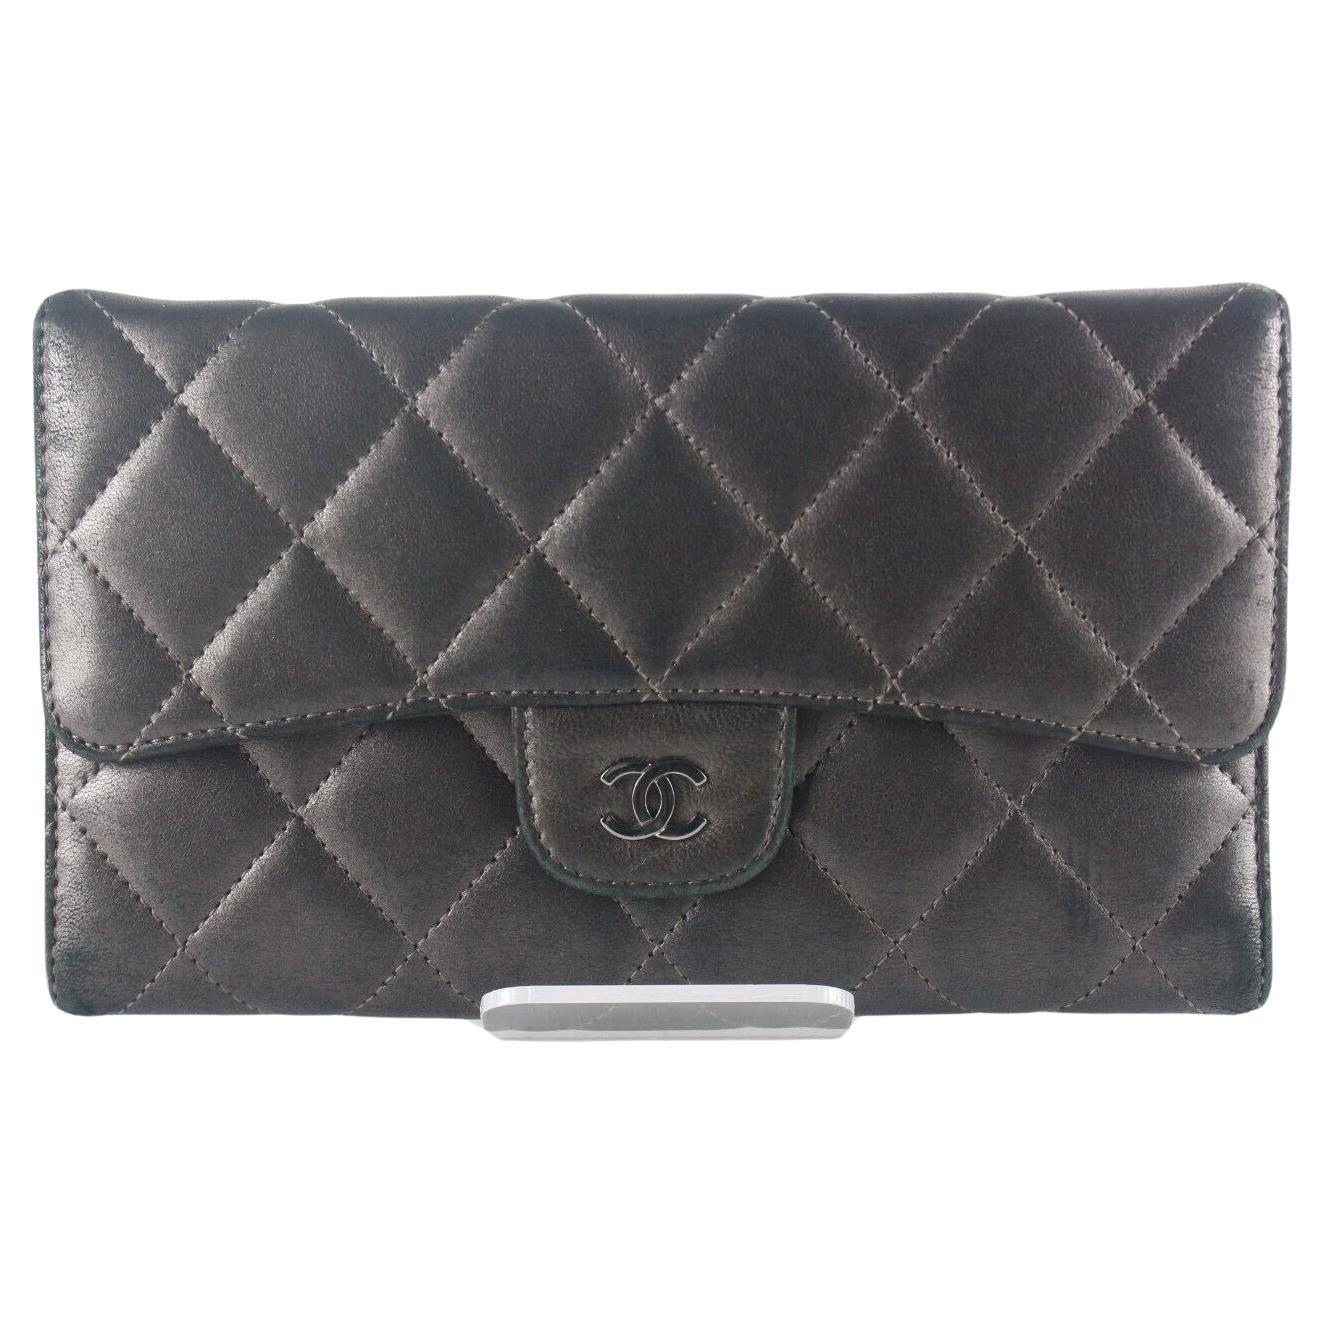 CHANEL Charcoal Grey Leathe Classic Flap Wallet 2CCS725K For Sale